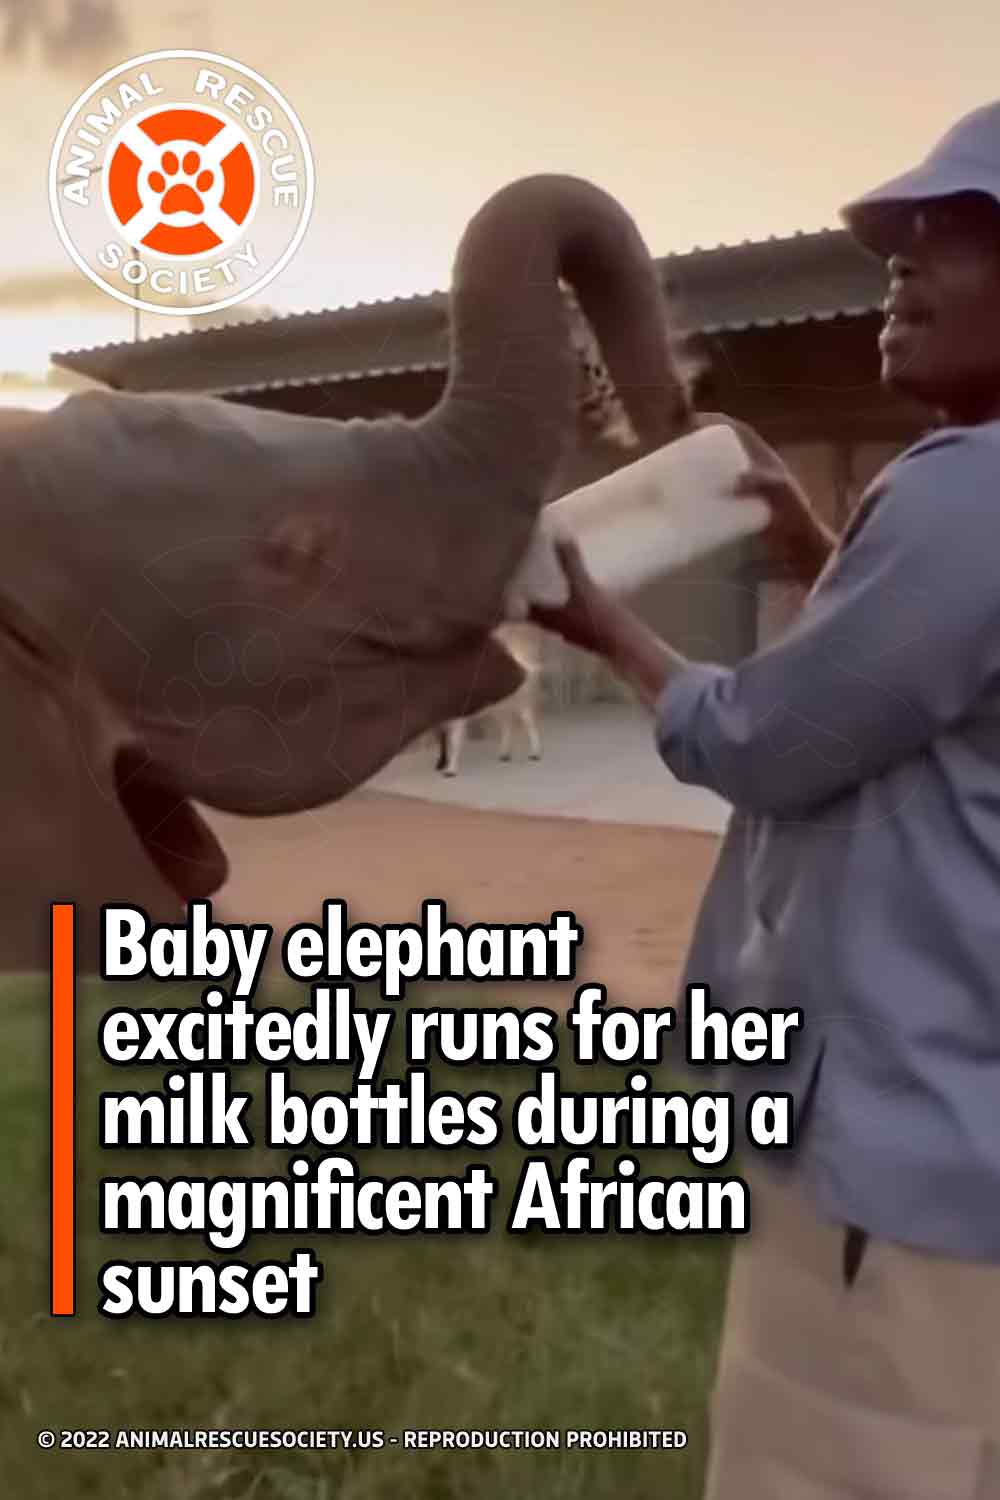 Baby elephant excitedly runs for her milk bottles during a magnificent African sunset